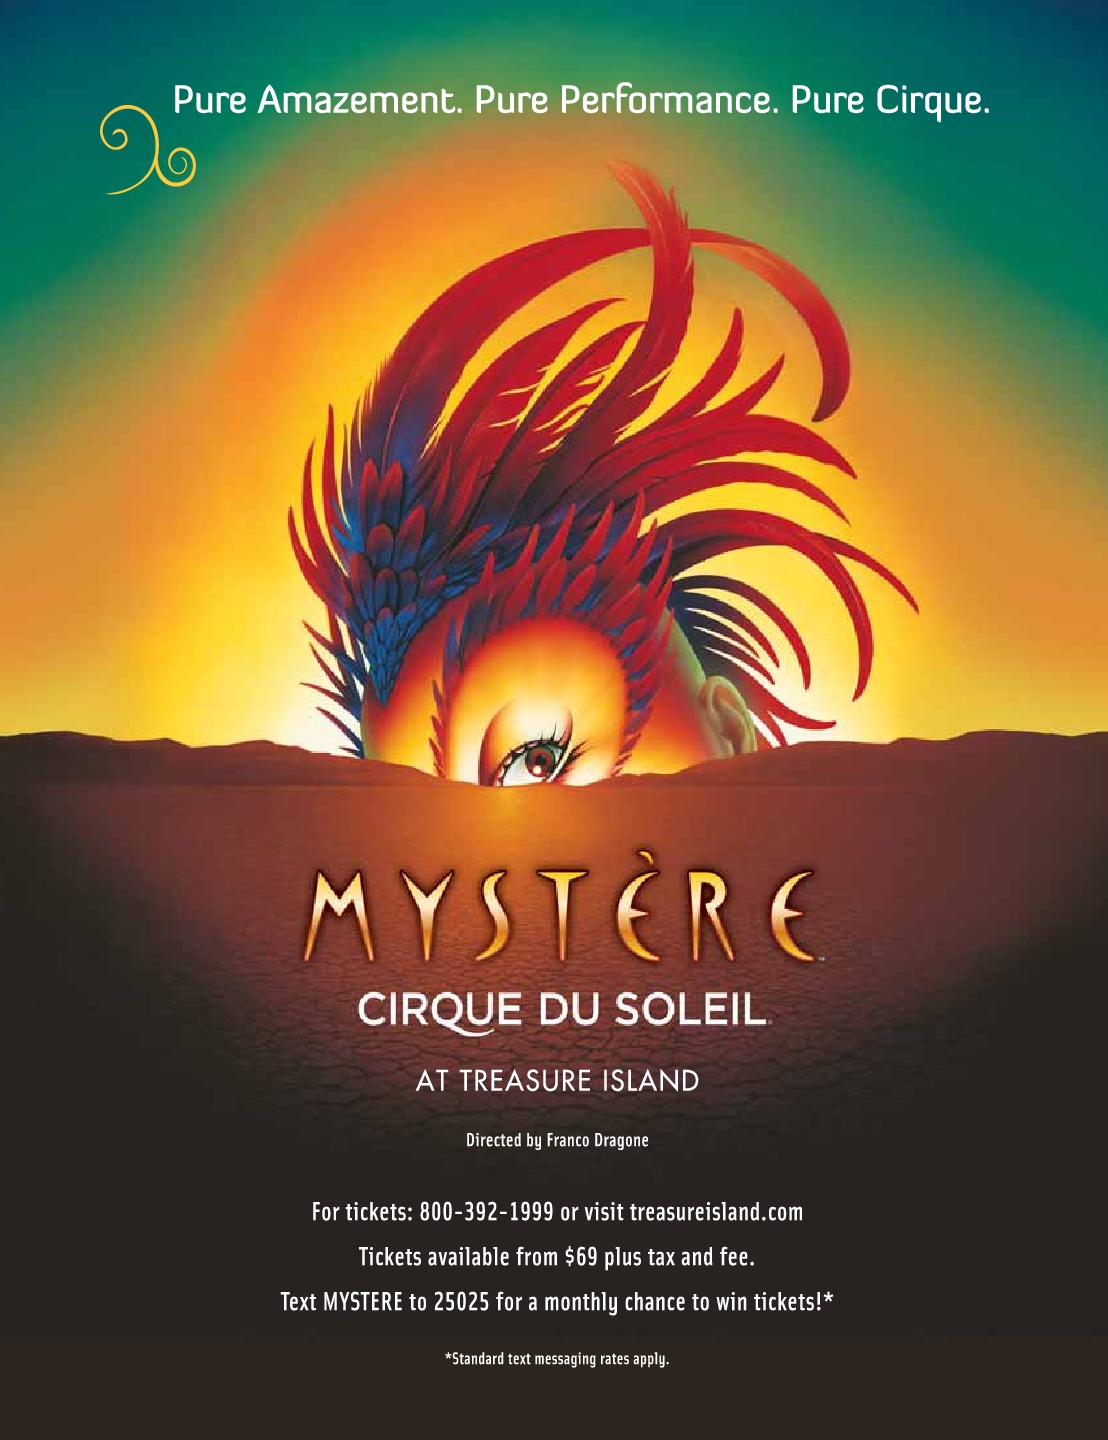  Mystere